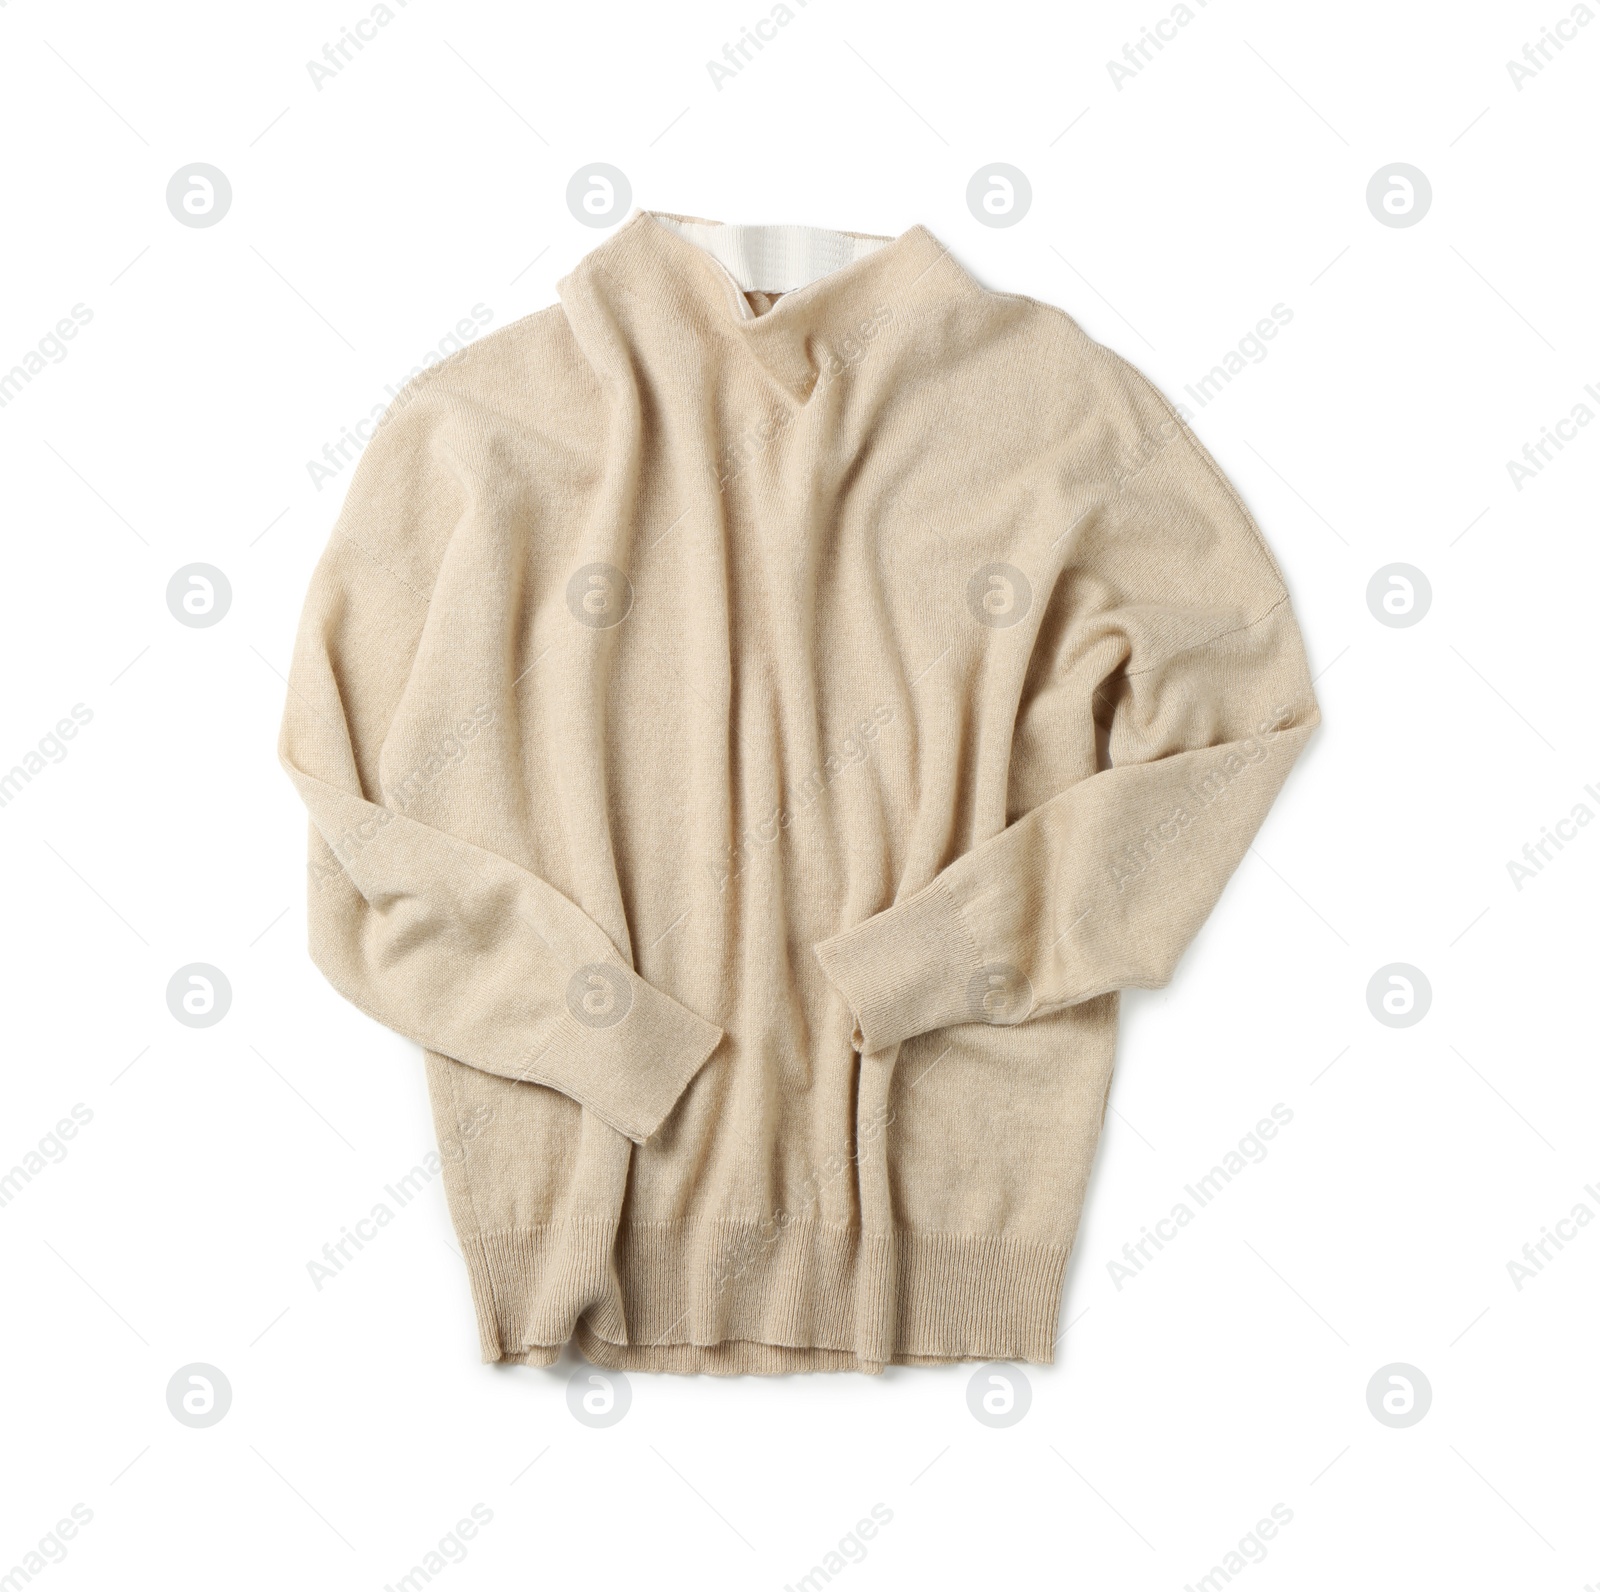 Photo of Cashmere sweater on white background, top view